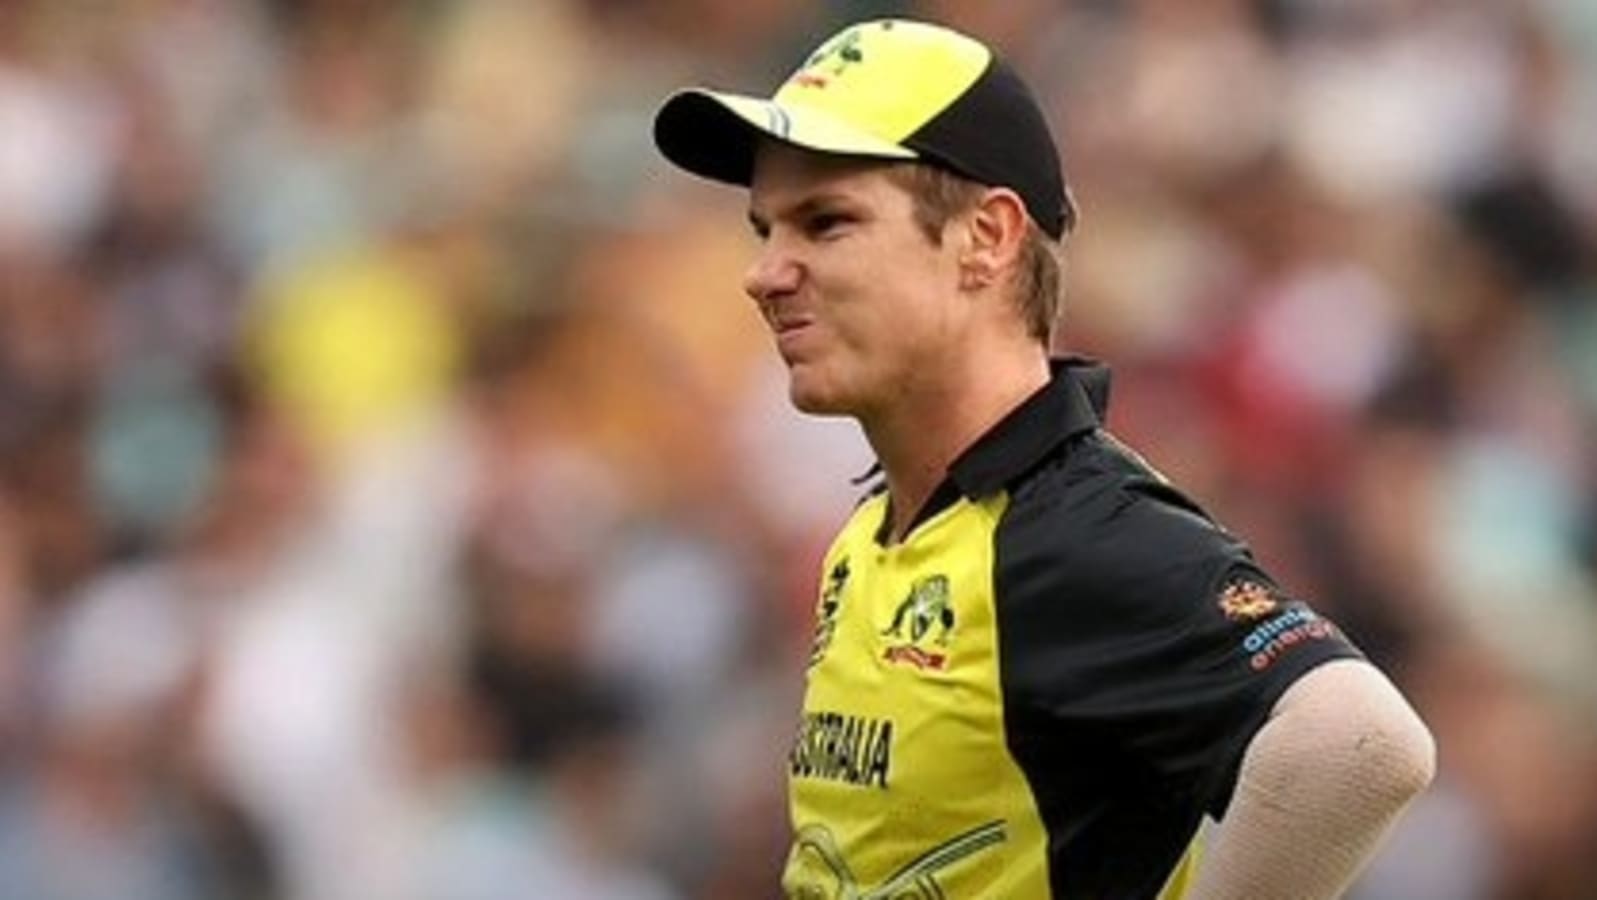 i-assume-ashton-agar-gives-key-update-on-availability-of-covid-hit-adam-zampa-ahead-of-aus-eng-t20-world-cup-match